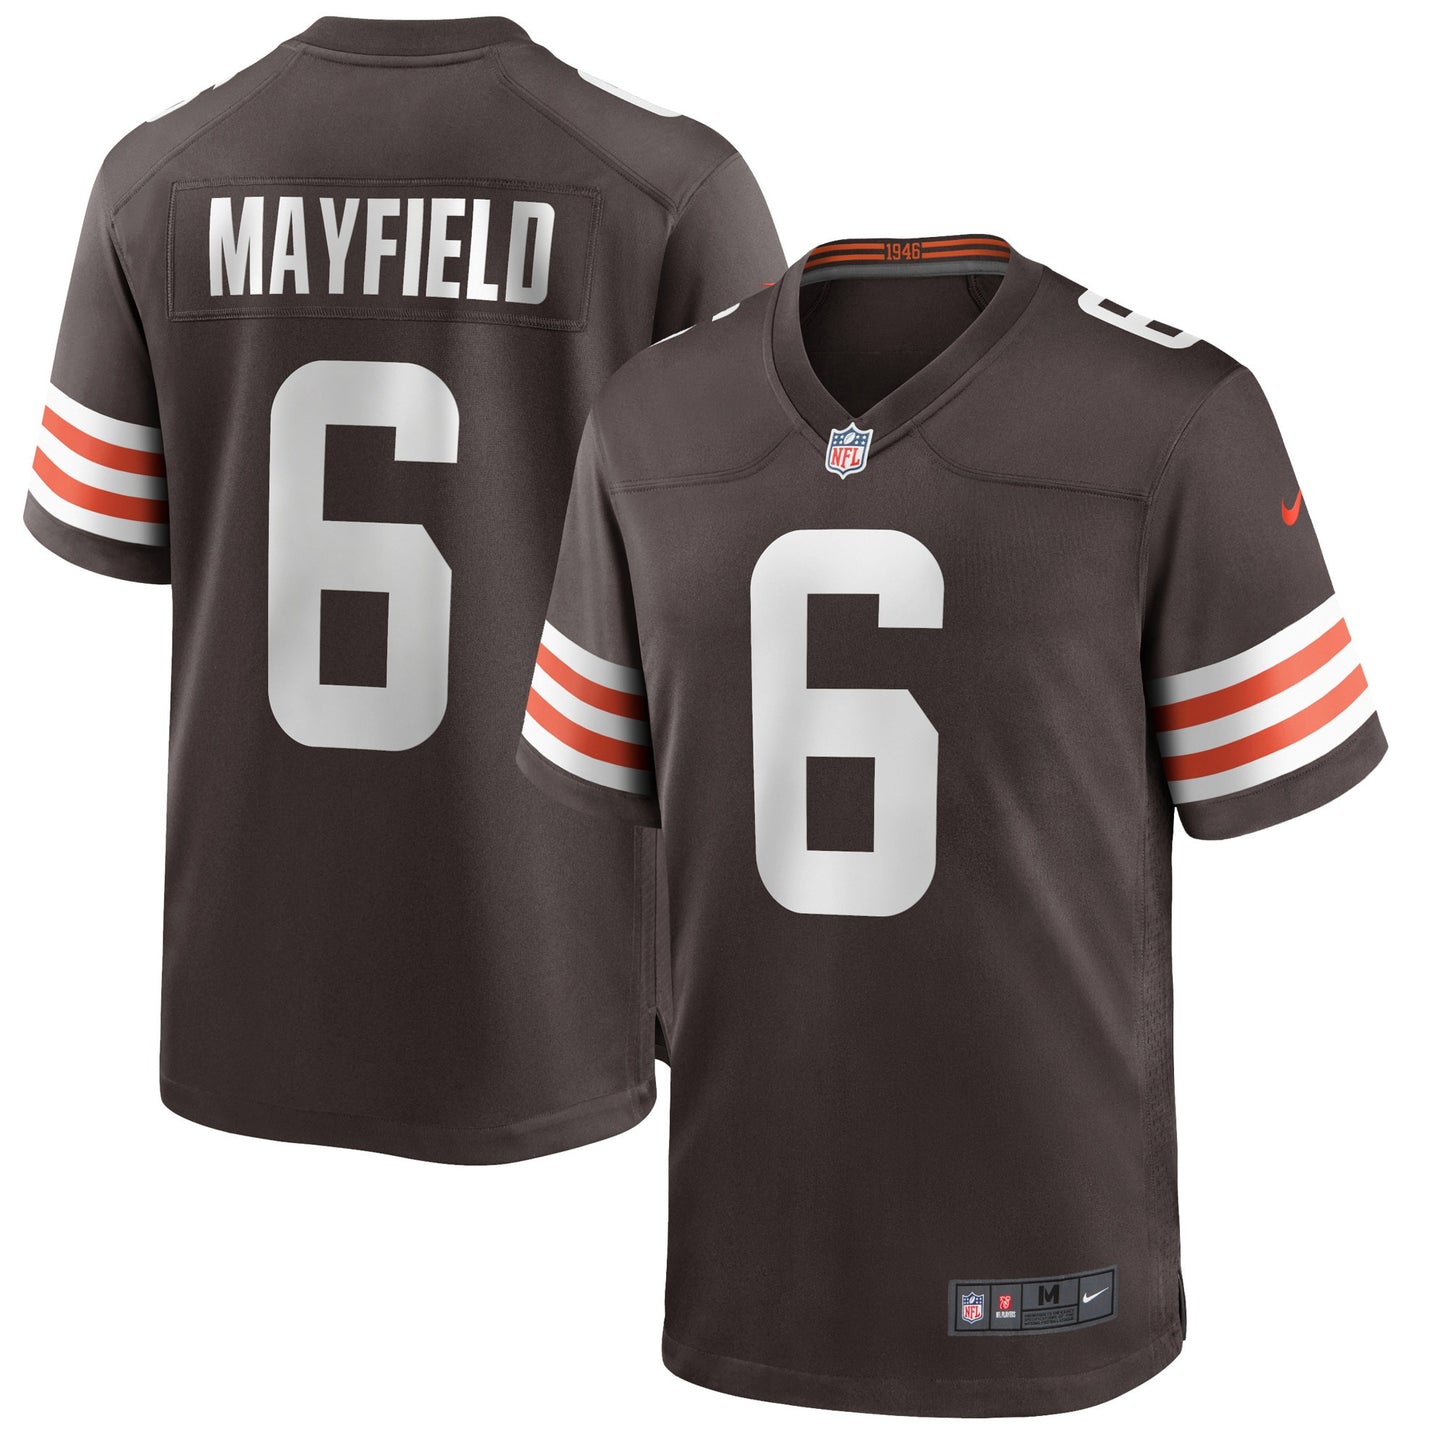 Baker Mayfield Cleveland Browns Nike Game Player Jersey - Brown